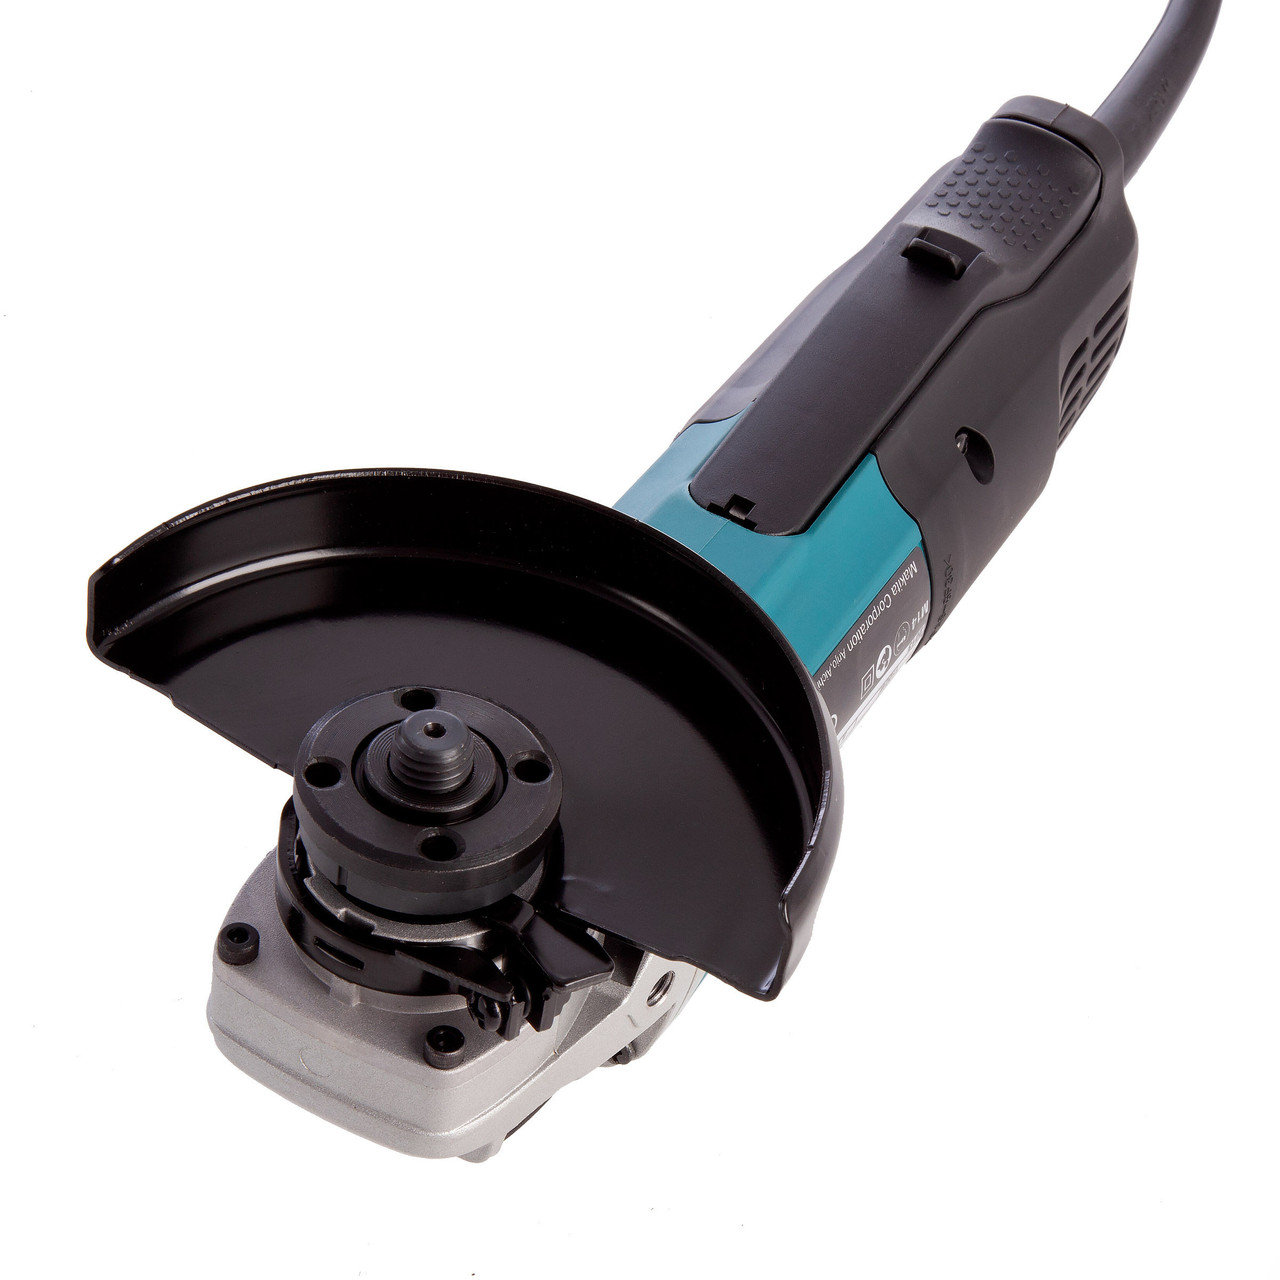 Makita 9565PCV SJS High Power Paddle Switch Angle Grinder, 5" 通販 